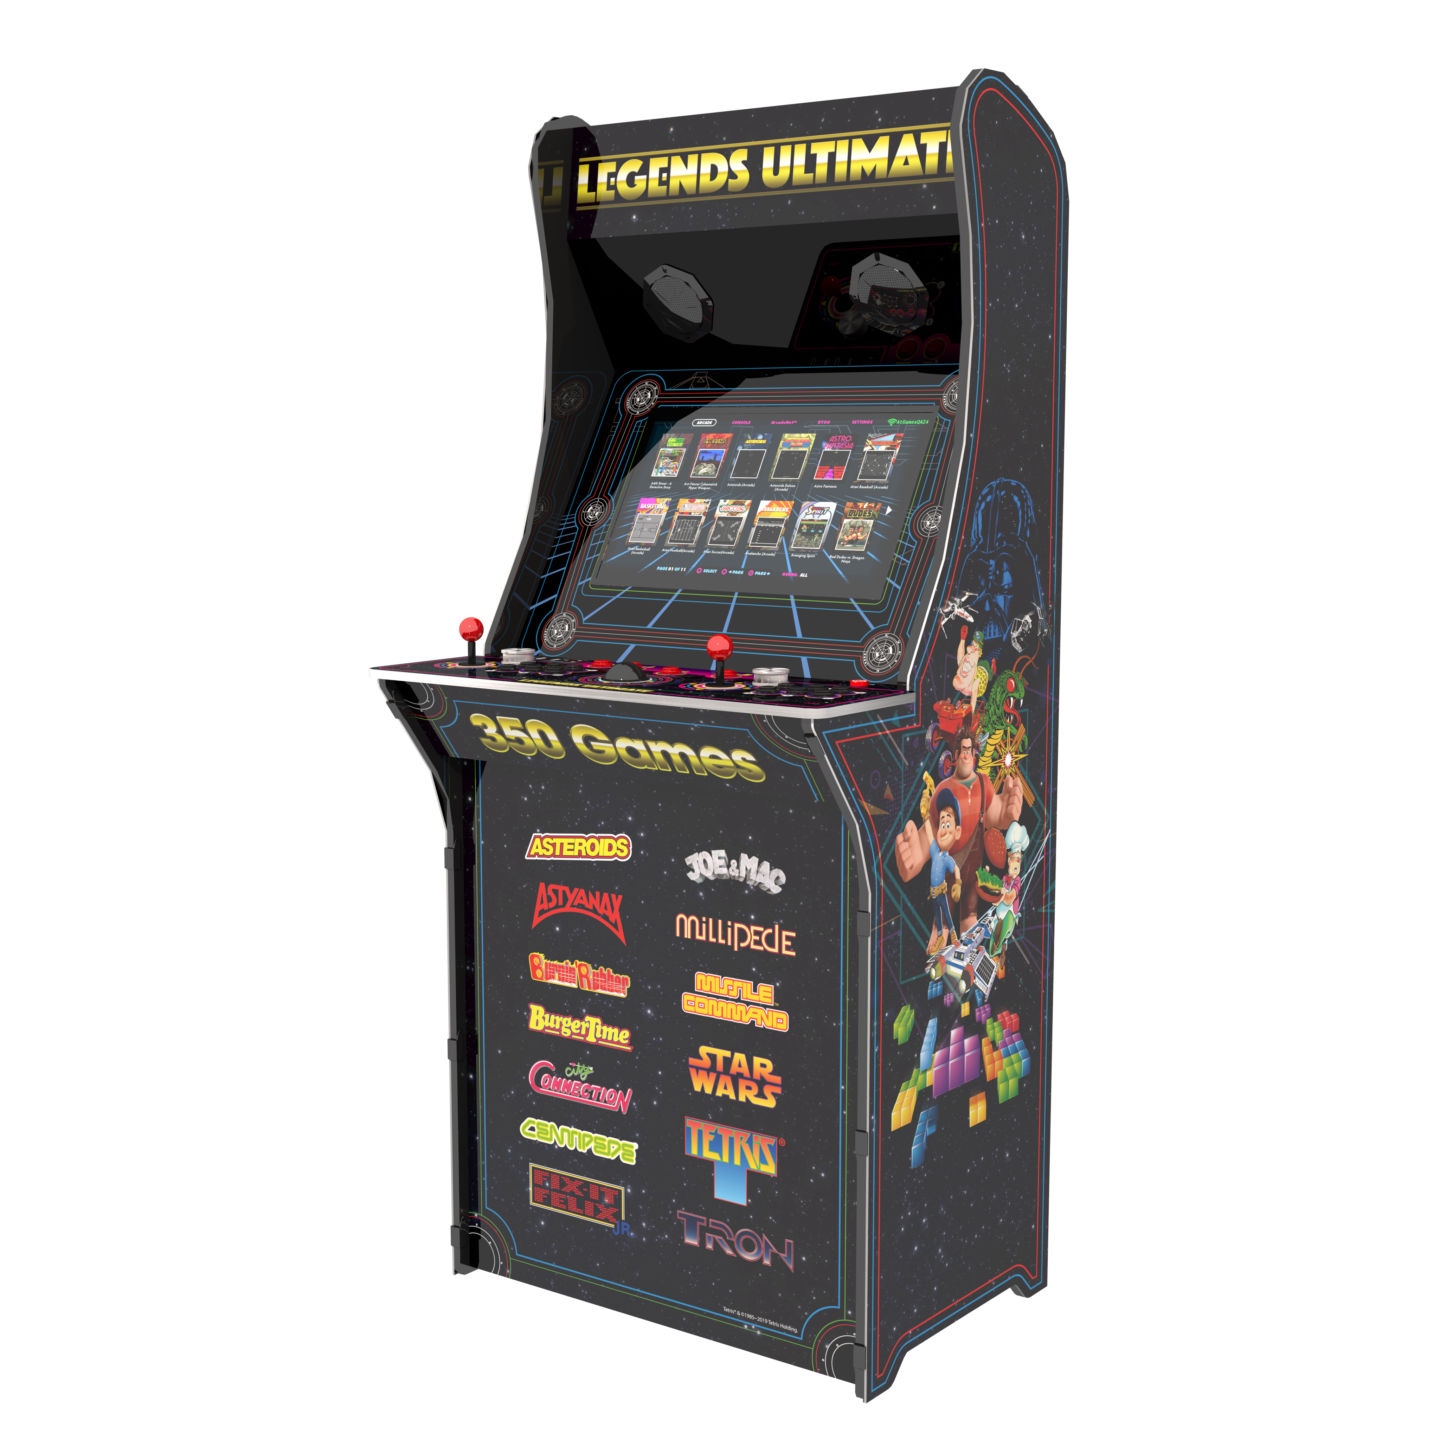 Atgames 350 Game Arcade Cabinet This Fall Page 2 Classic